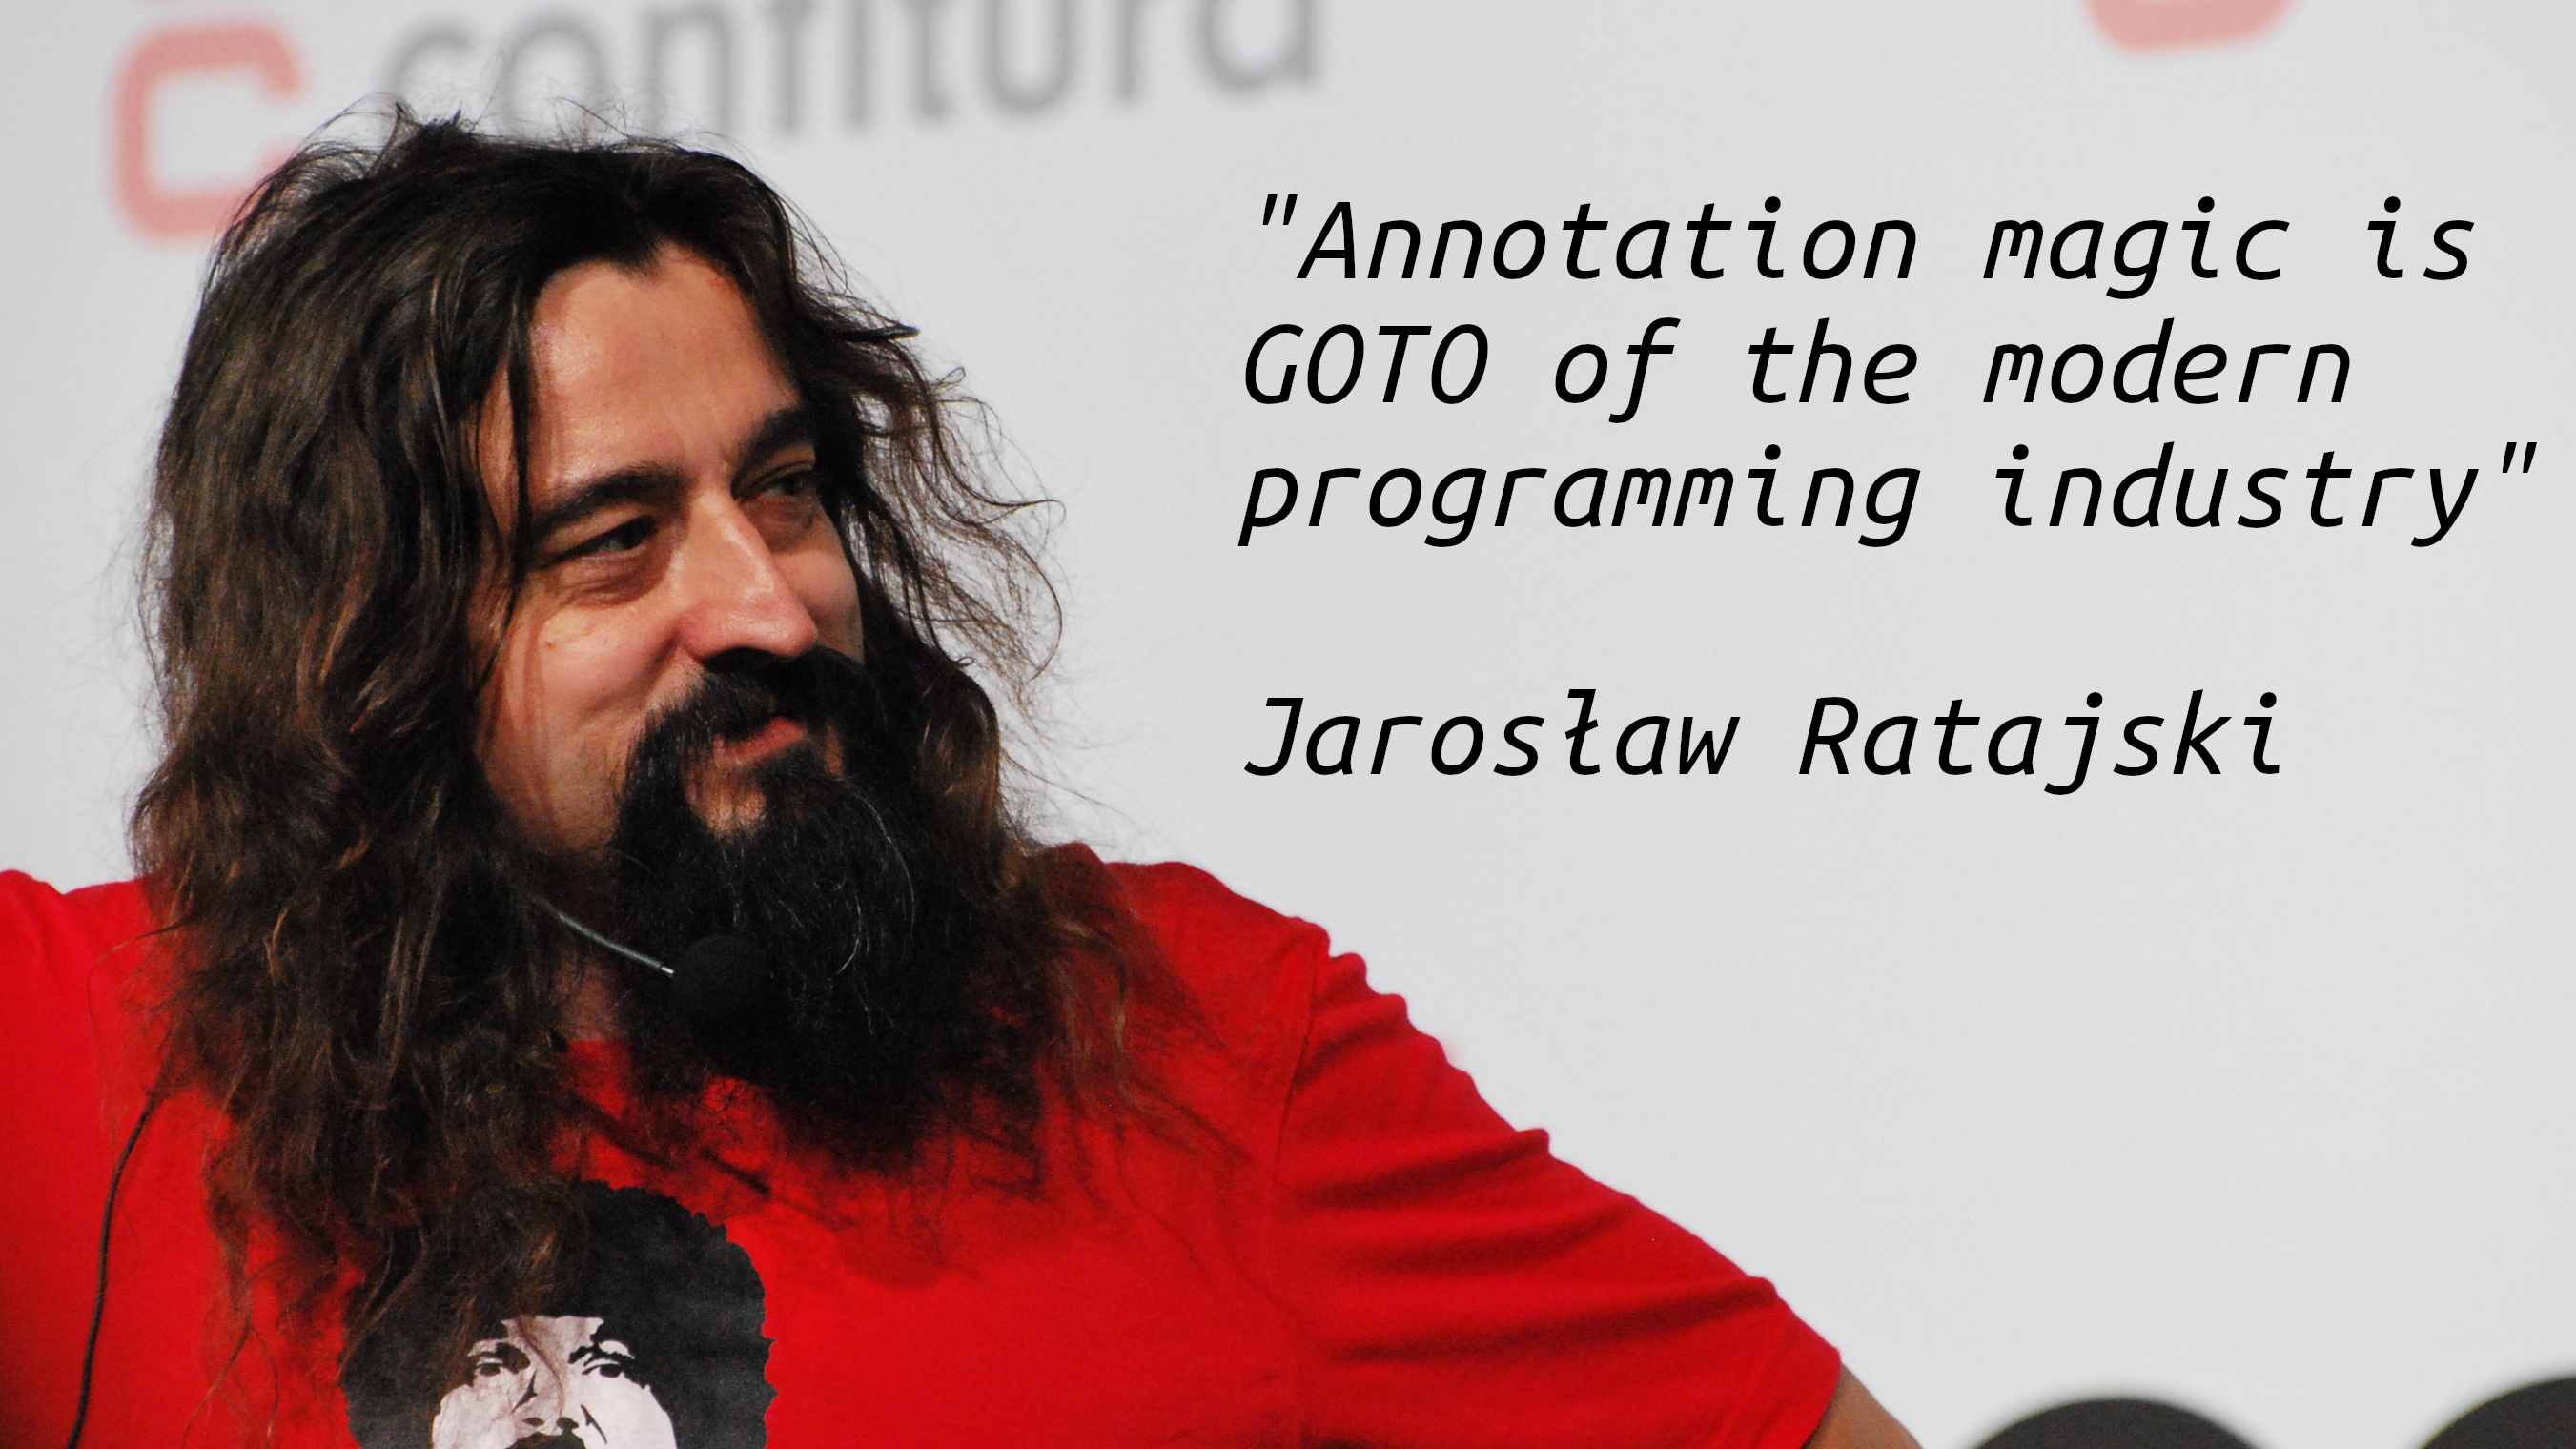 "Annotation magic is GOTO of the modern programming industry"